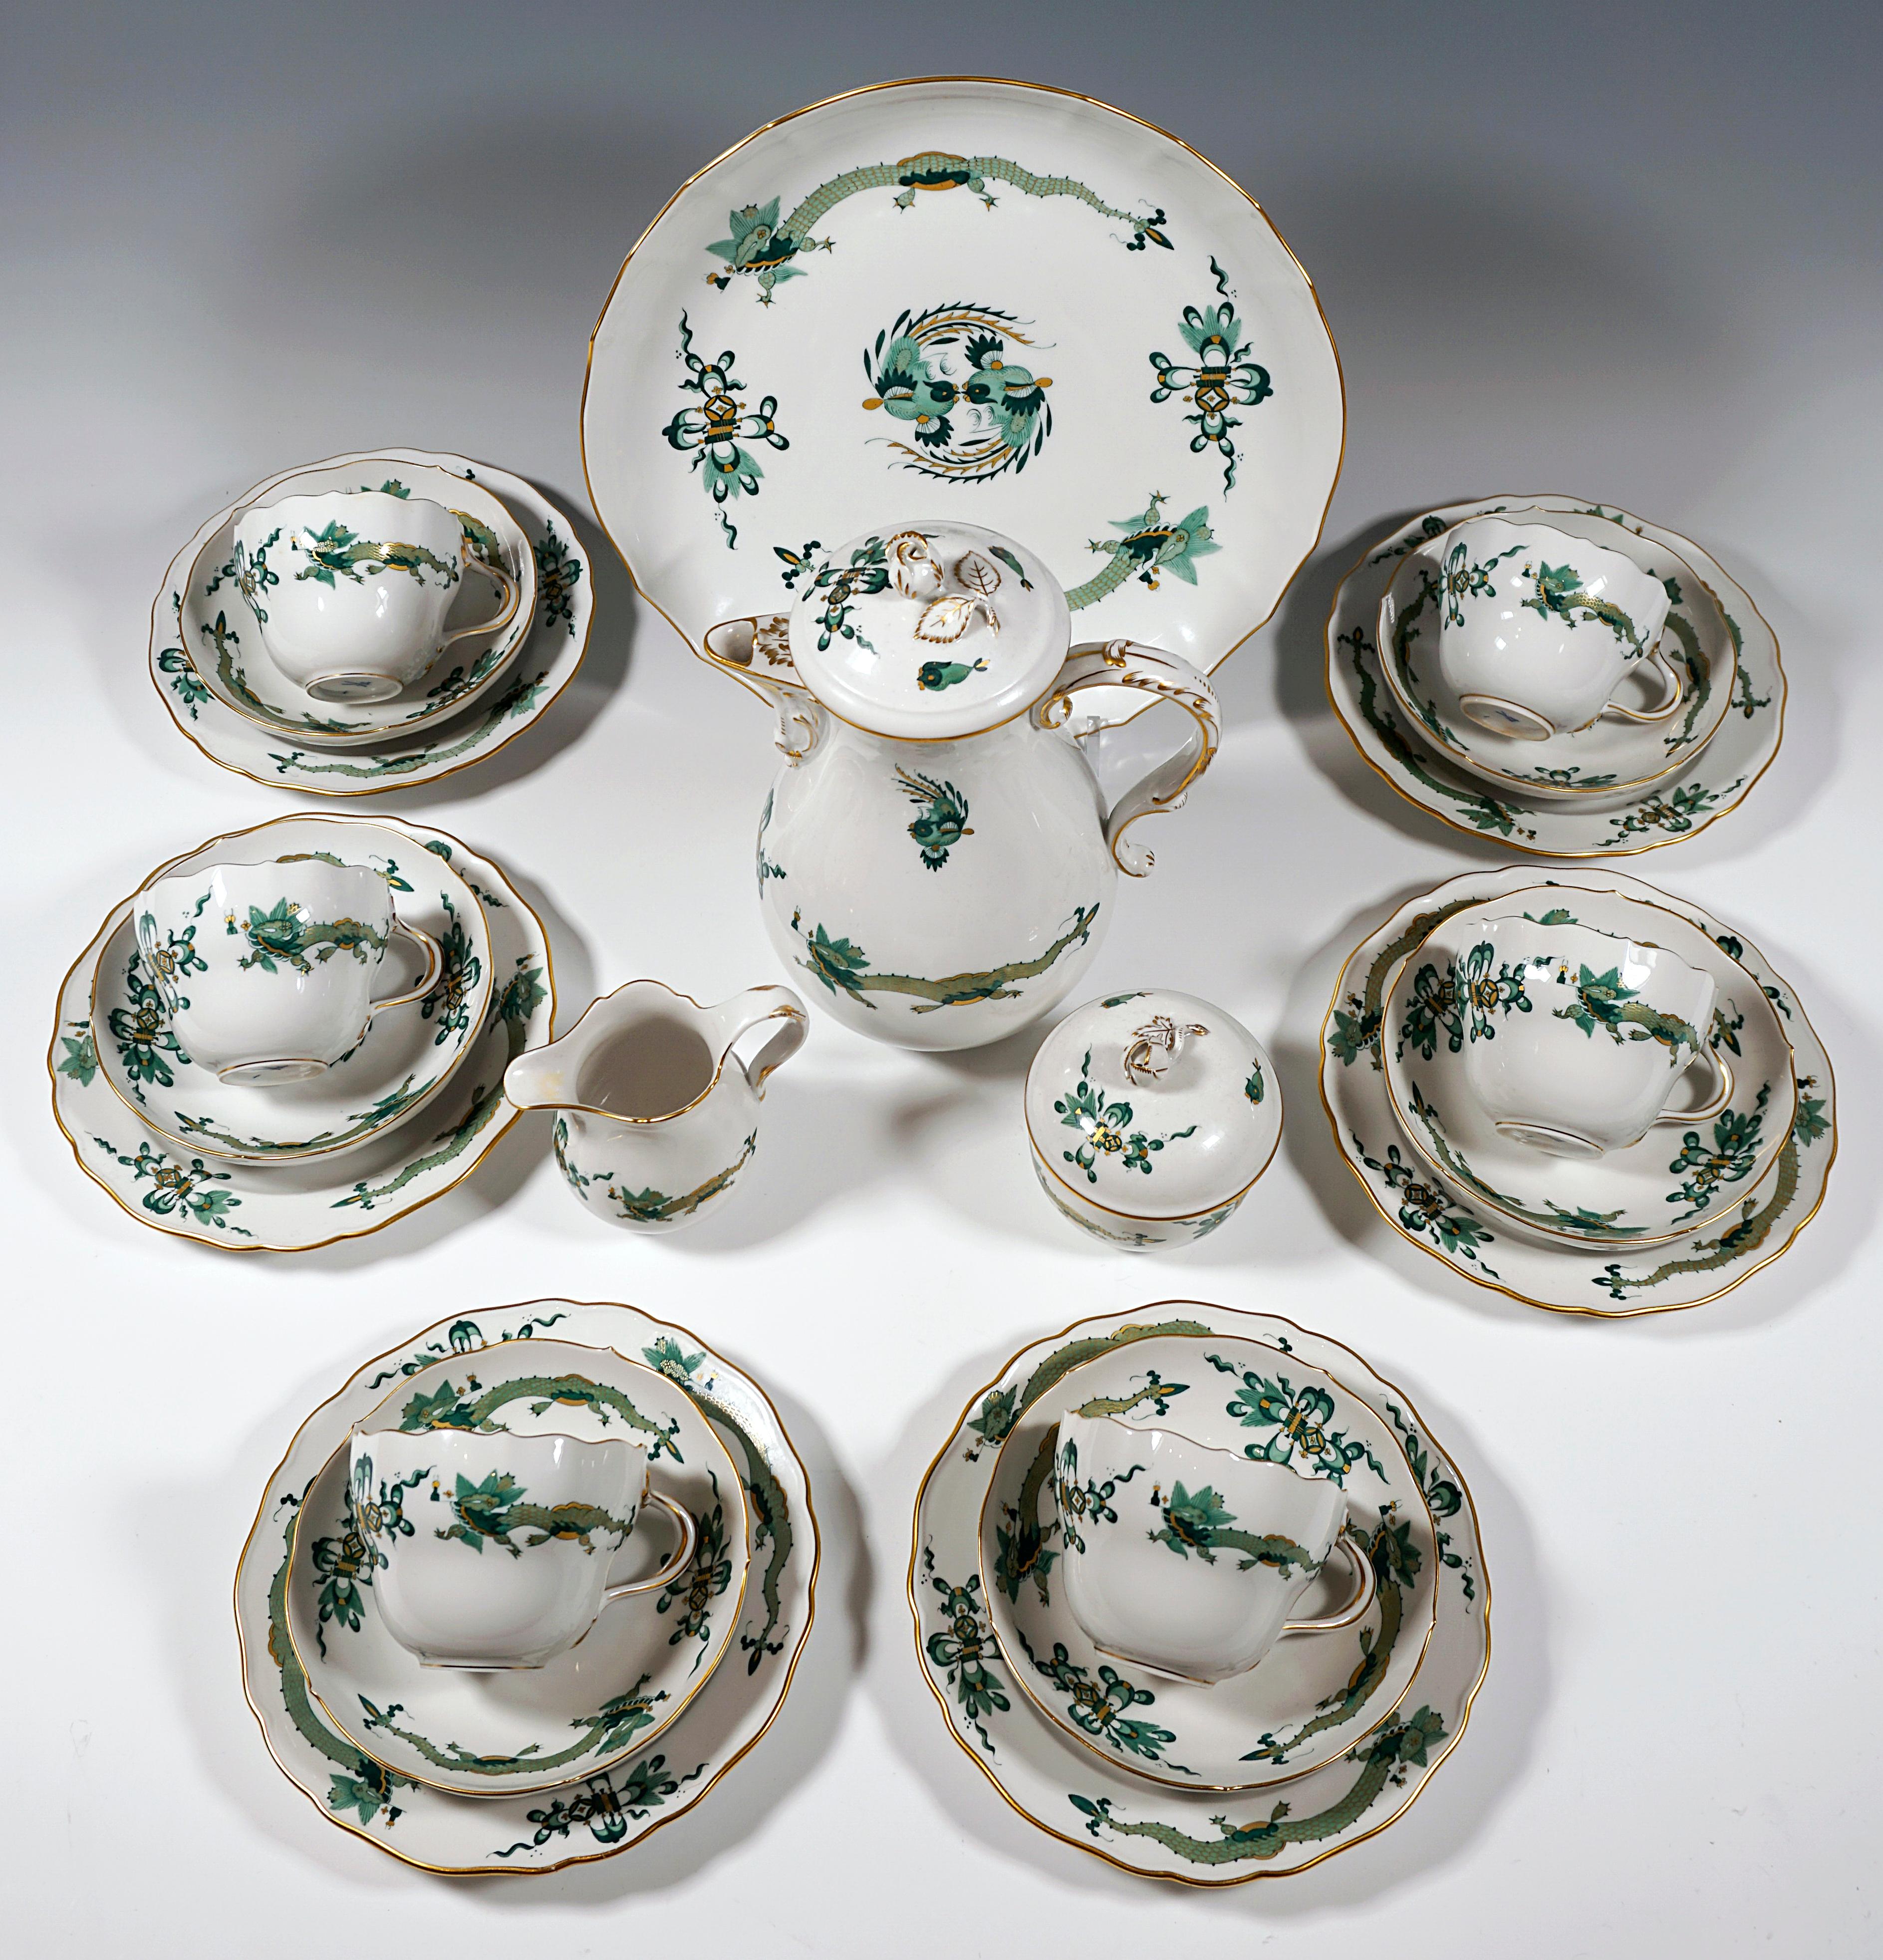 Meissen Coffee Set for 6 Persons,
decor number 320310 - Rich Dragon in greens shaded gold, gold rim

22 parts:
1 coffee pot with lid - height = 9.25 in
1 creamer - height = 3.74 in
1 sugar urn with did - height = 3.54 in
1 serving plate -